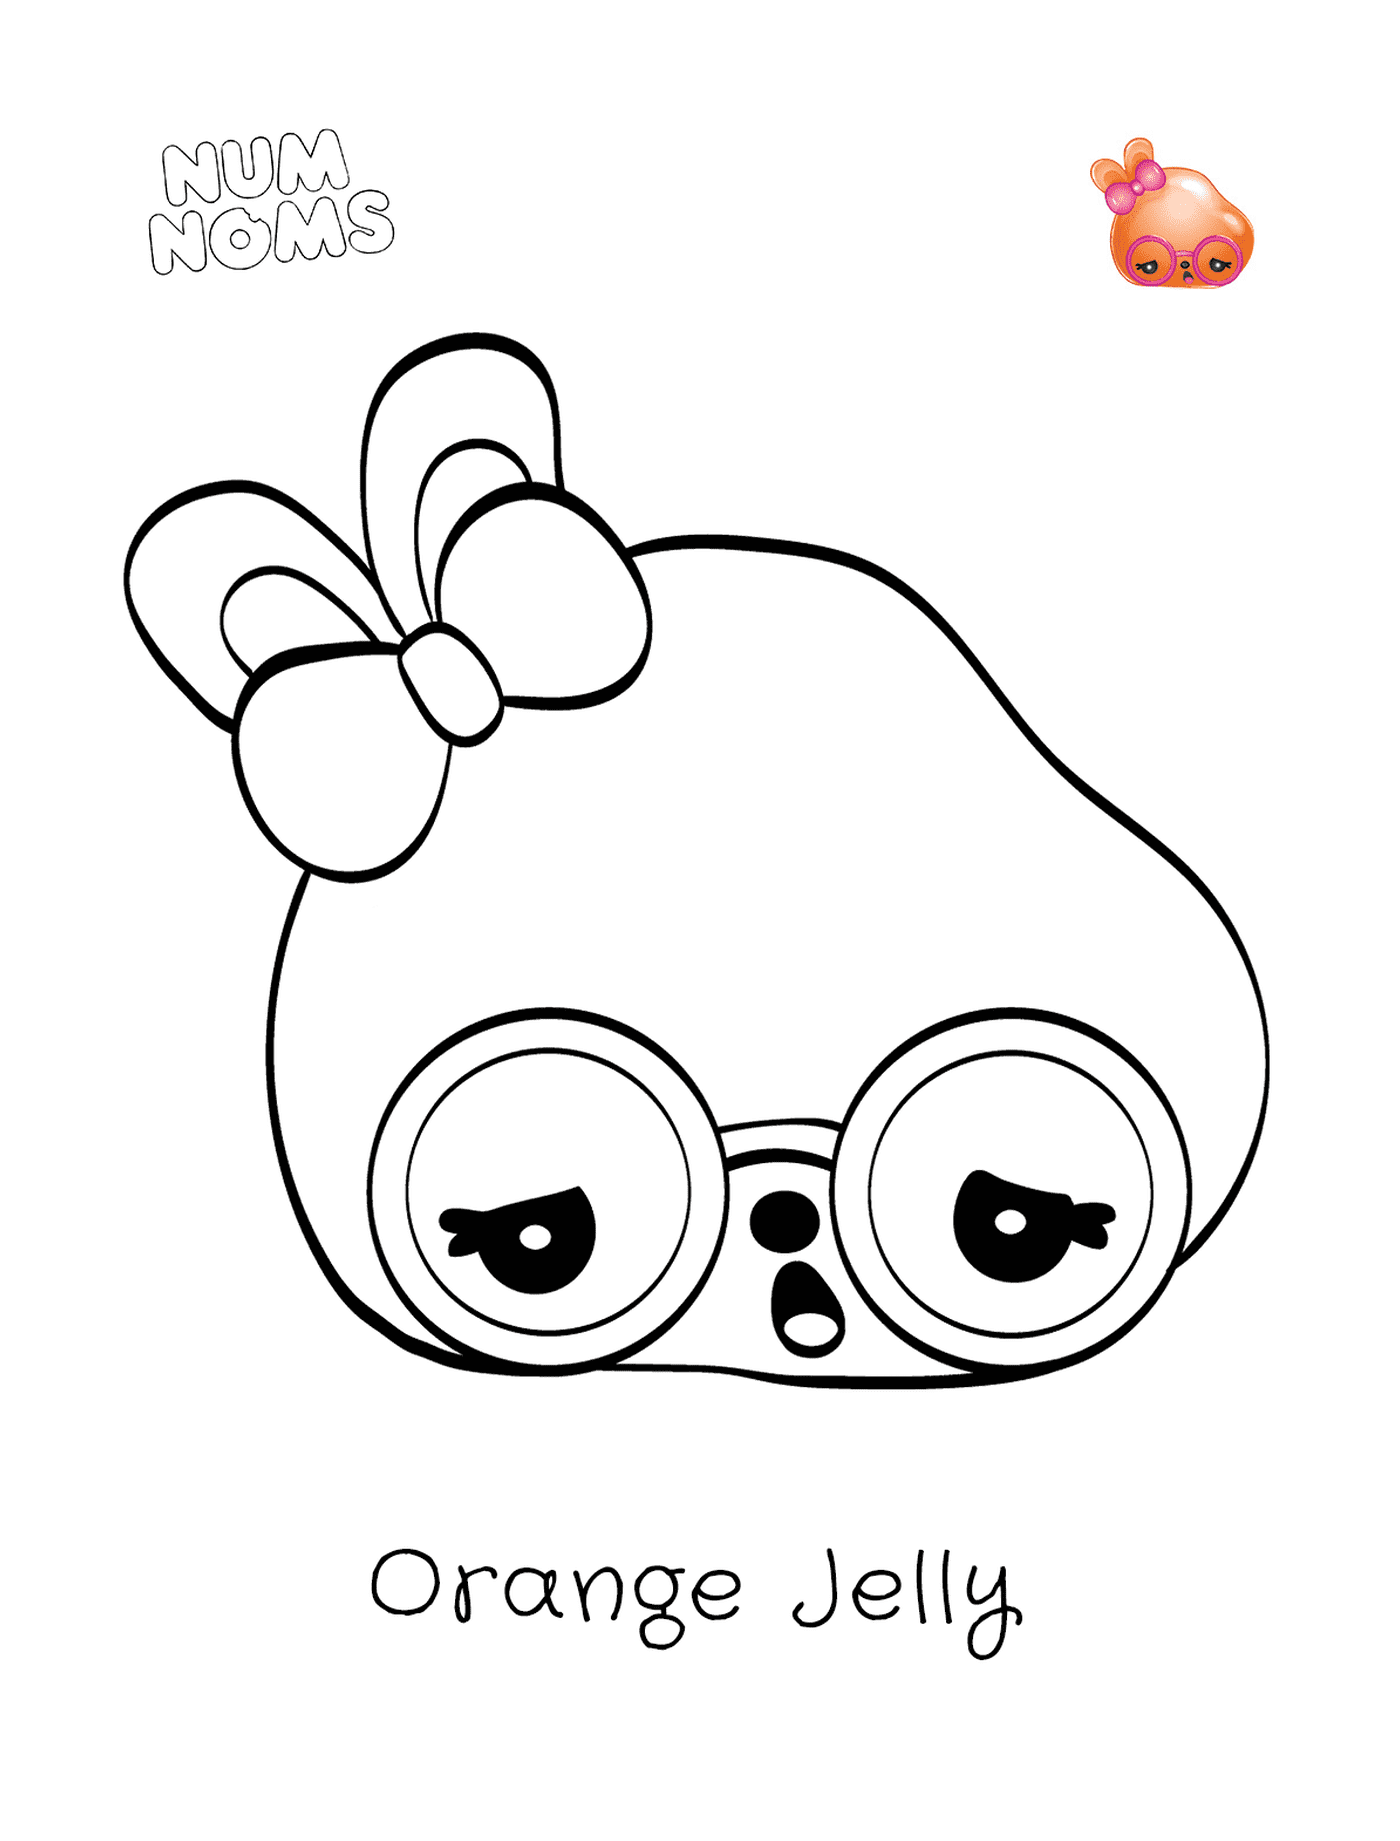  Jelly orange, a funny character 